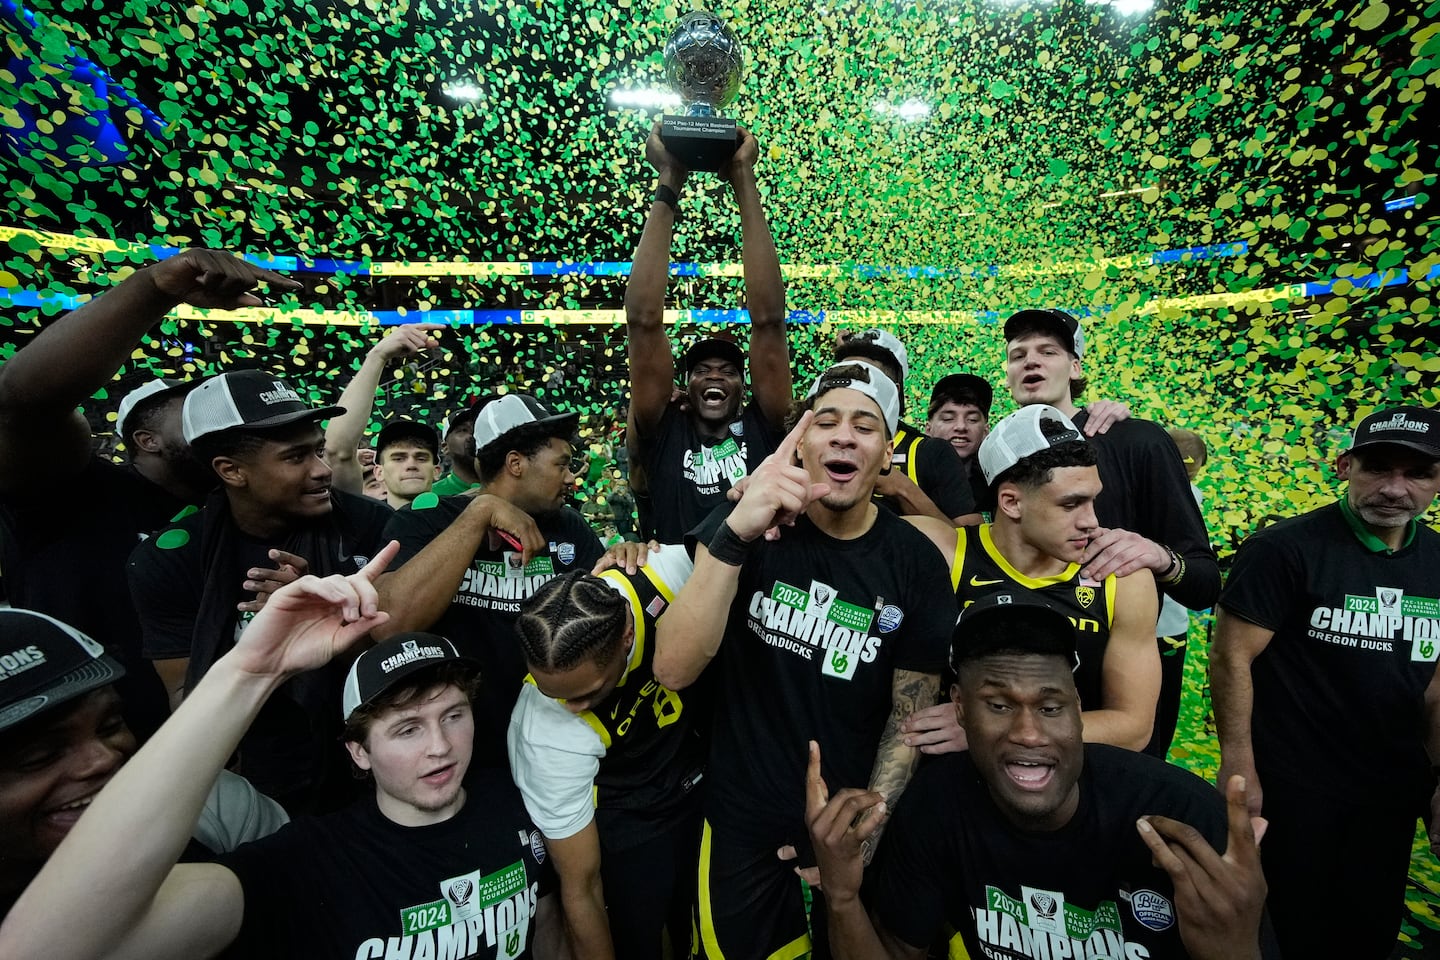 Ducks seeded 11th in men's NCAA Tournament after Pac-12 title - OPB